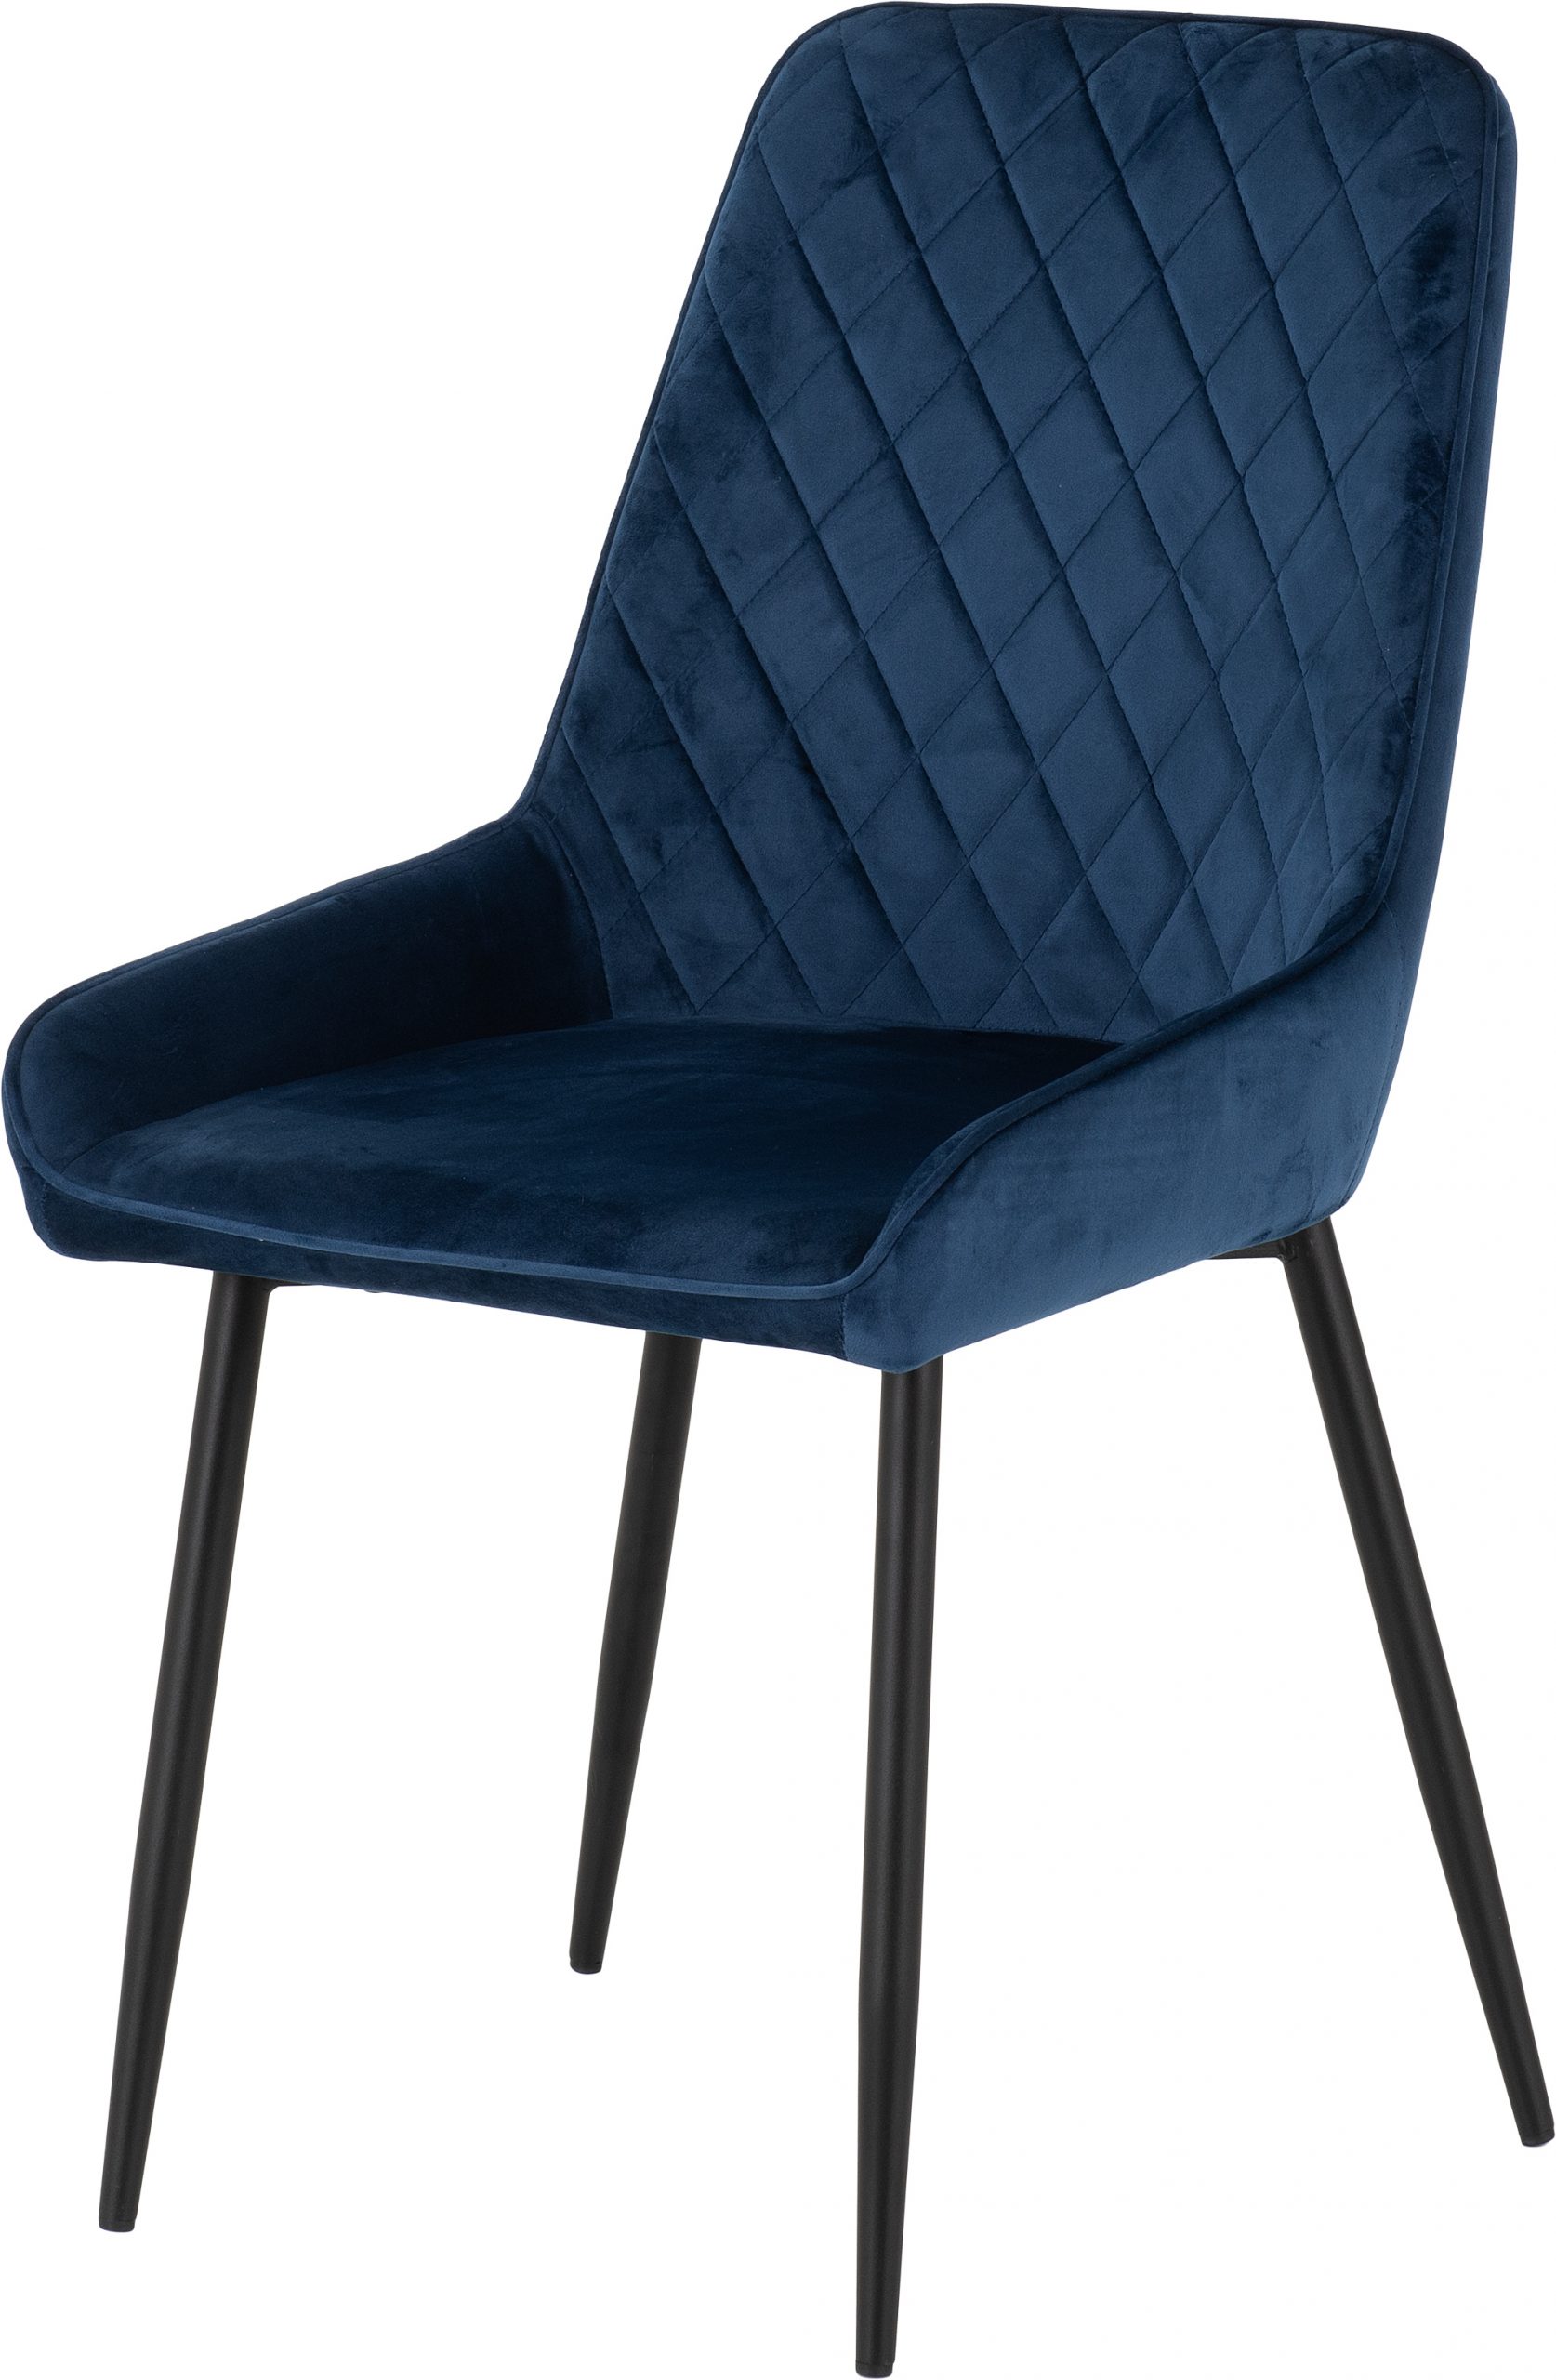 Avery Chair in Sapphire Blue